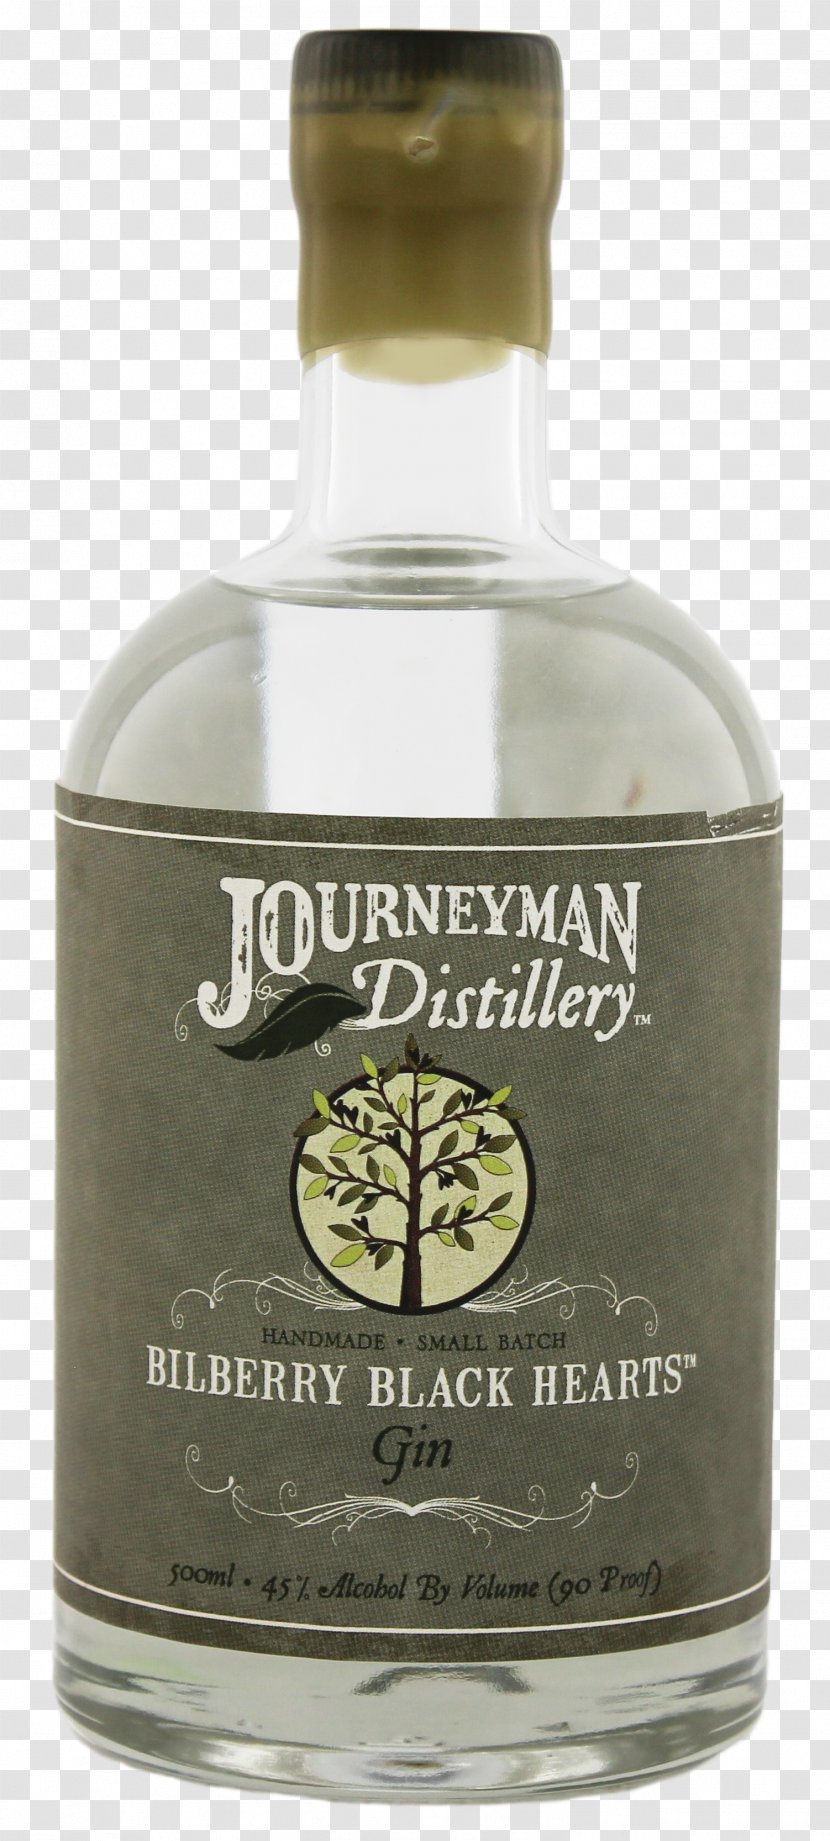 Liqueur Journeyman Distillery Bilberry Black Hearts Aged Gin 0,5 L Product - Drink Transparent PNG